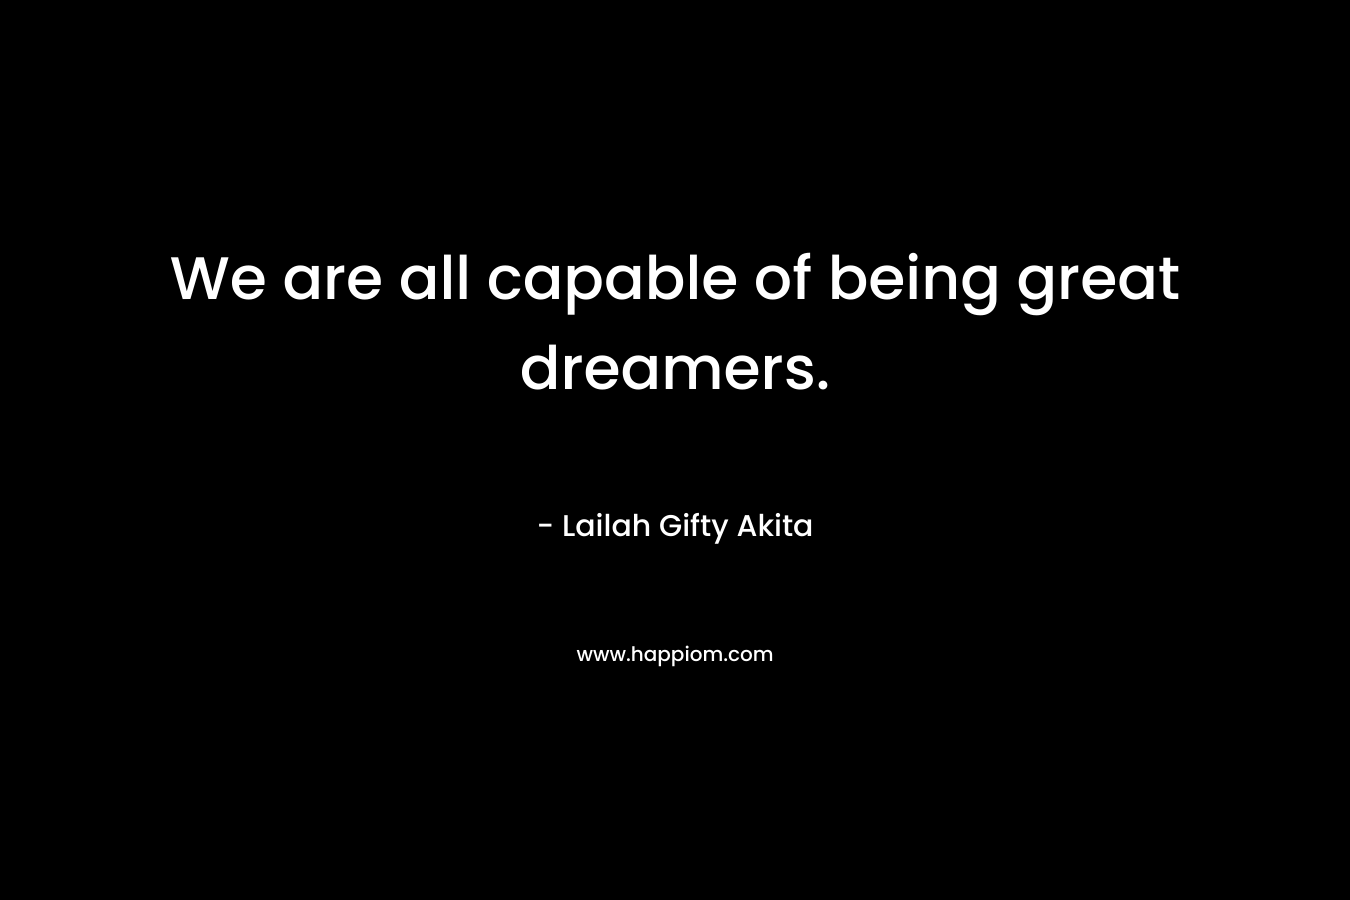 We are all capable of being great dreamers.